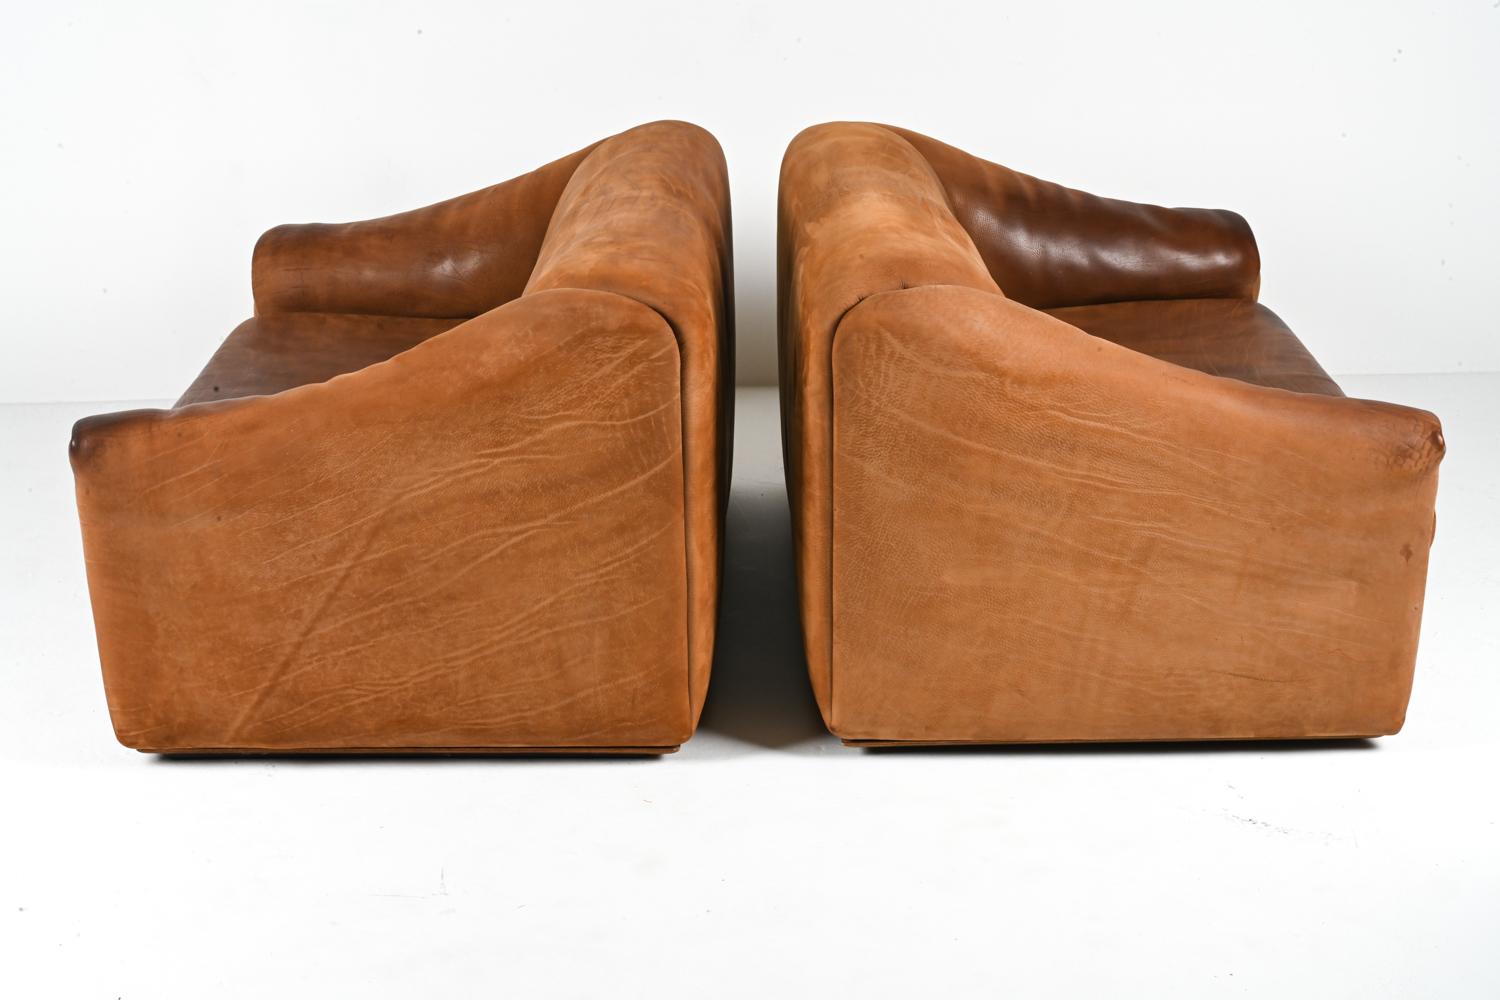 Pair of De Sede DS-47 Two-Seat Sofas in Nubuck Leather, c. 1970's For Sale 12